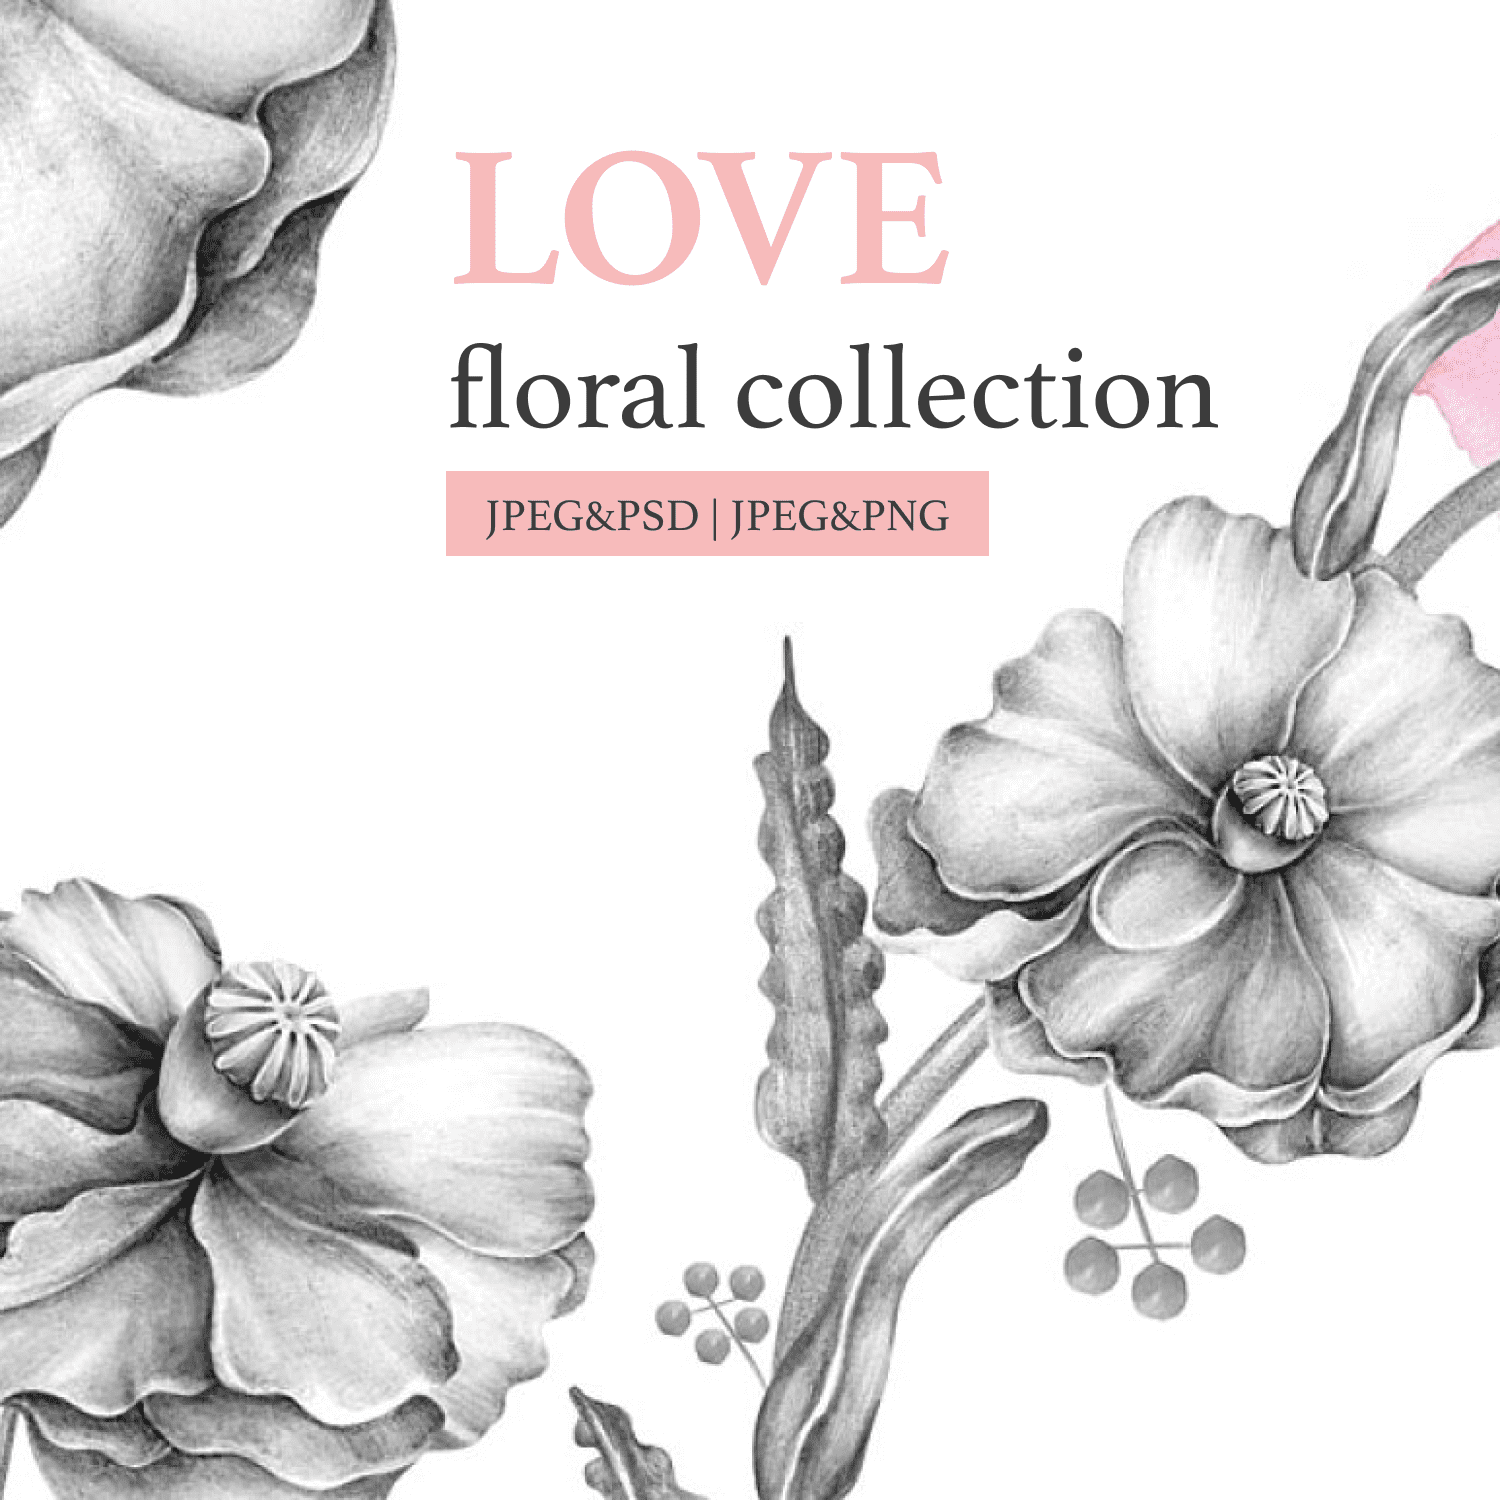 "Love" floral collection.